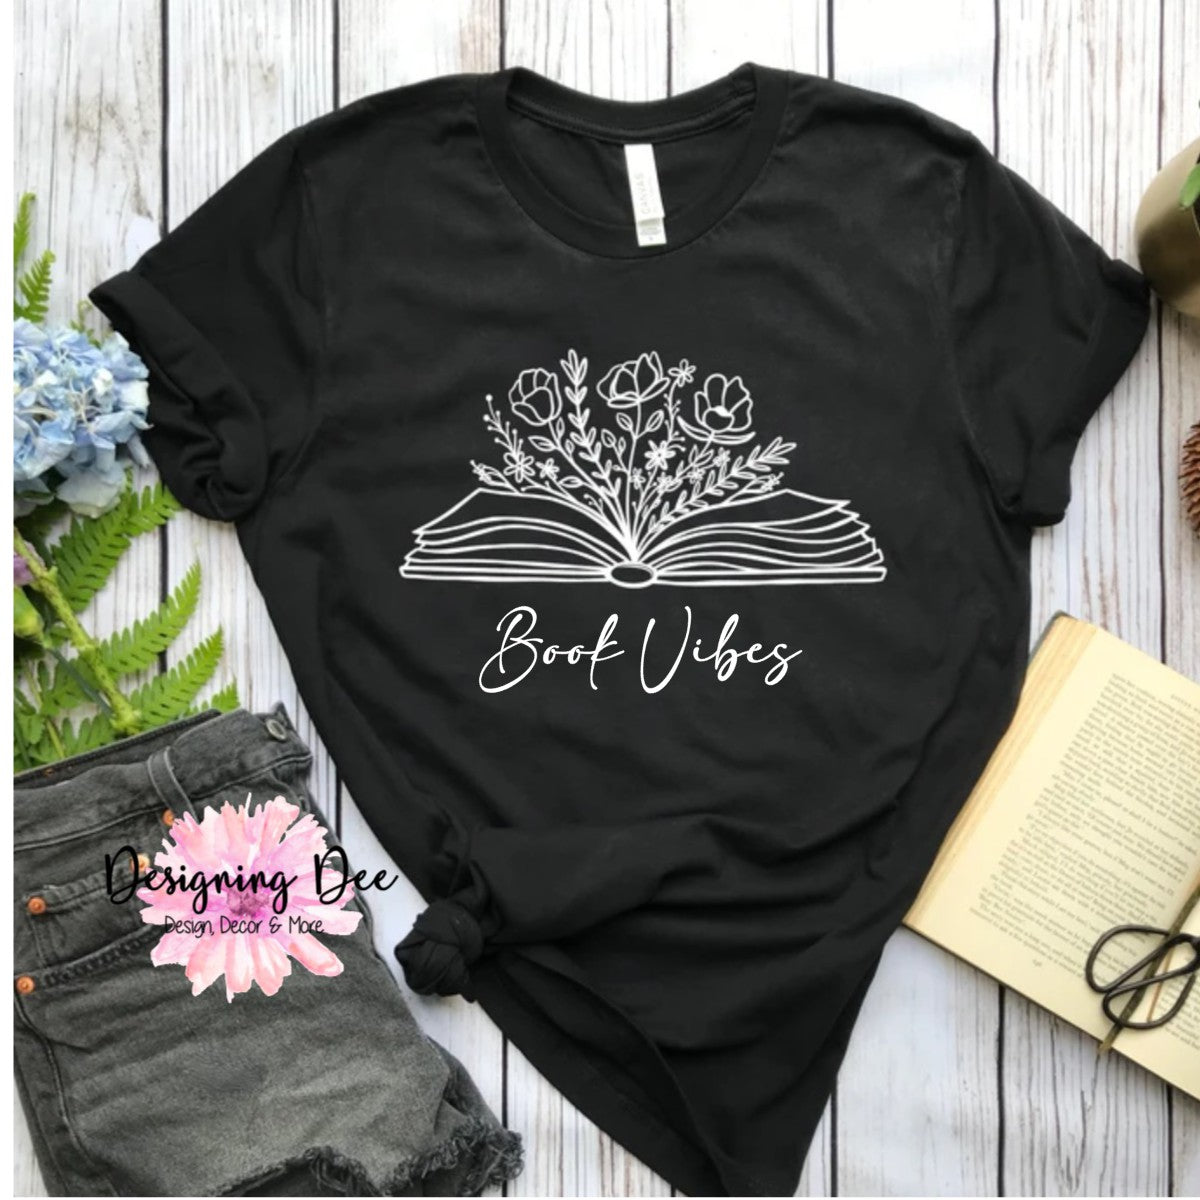 Book Vibes graphic t-shirt